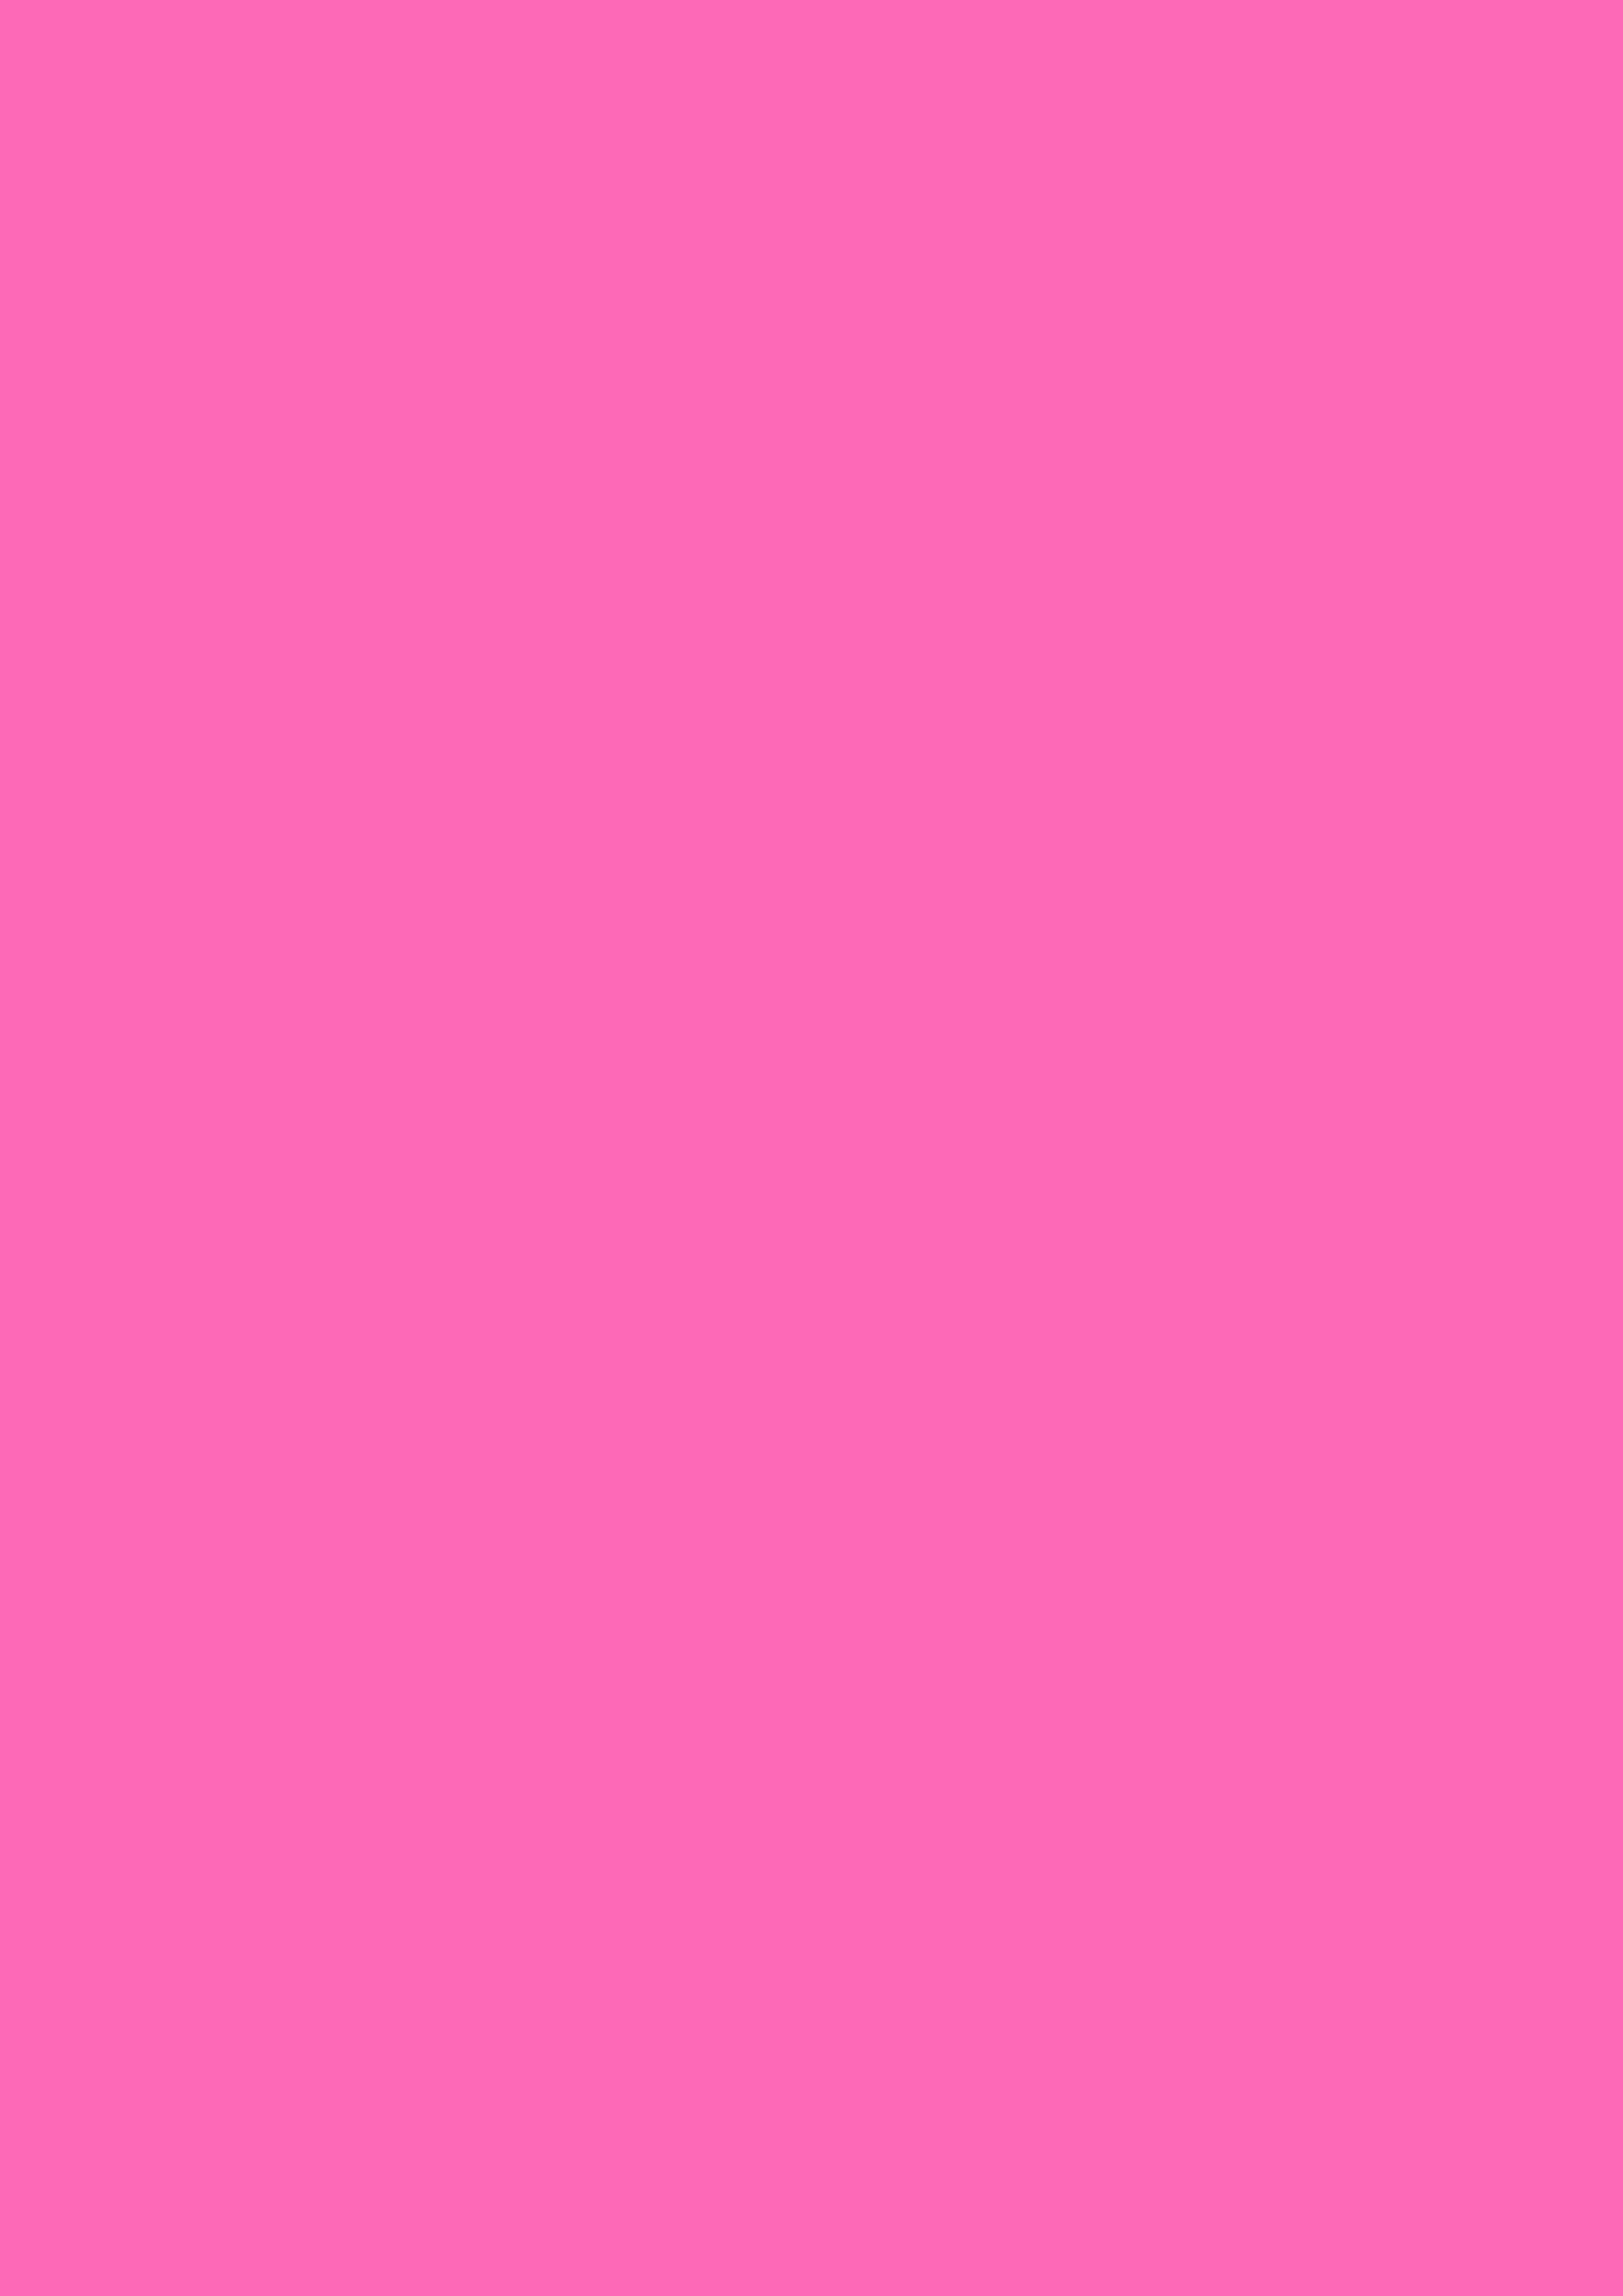 2480x3508 Hot Pink Solid Color Background